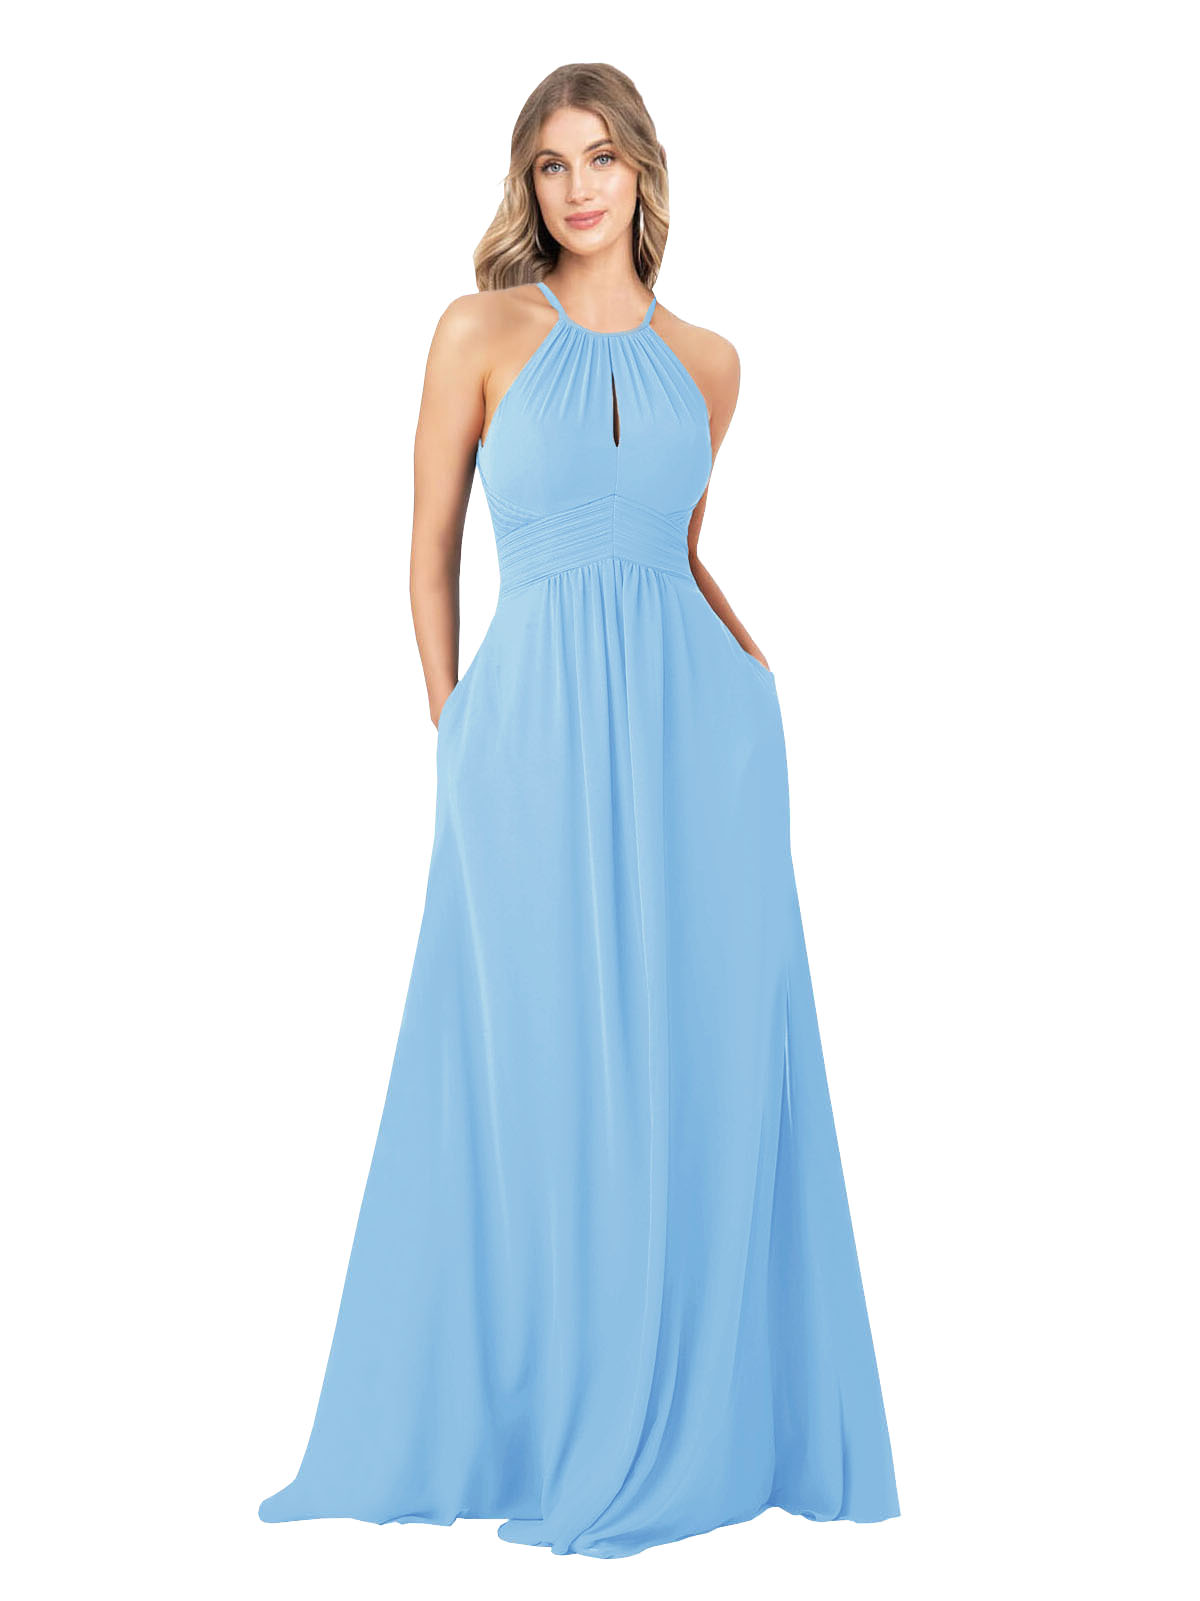 Periwinkle A-Line High Neck Sleeveless Long Bridesmaid Dress Cassiopeia